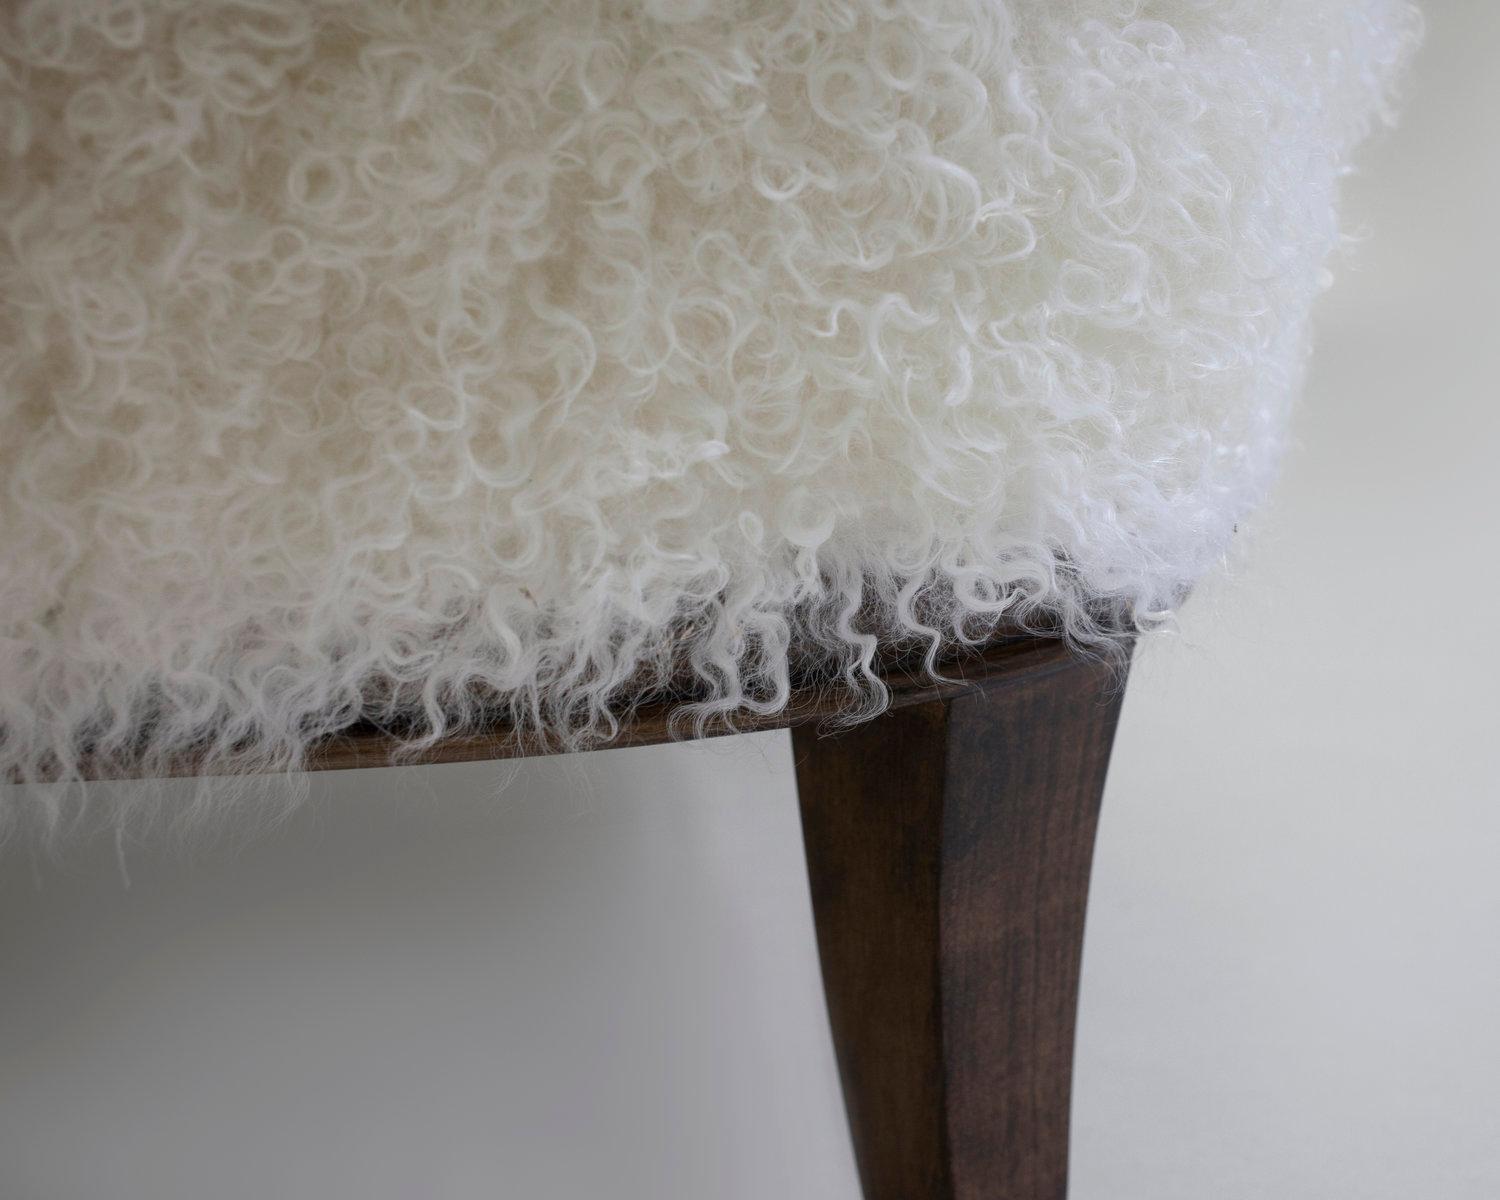 The Willow ottoman created to match the club chair of same name is shown in matching off white faux skin on wood stained legs. Hand carved and upholstered with feather and down seat cushion with metal leg caps. Made custom to your specifications as